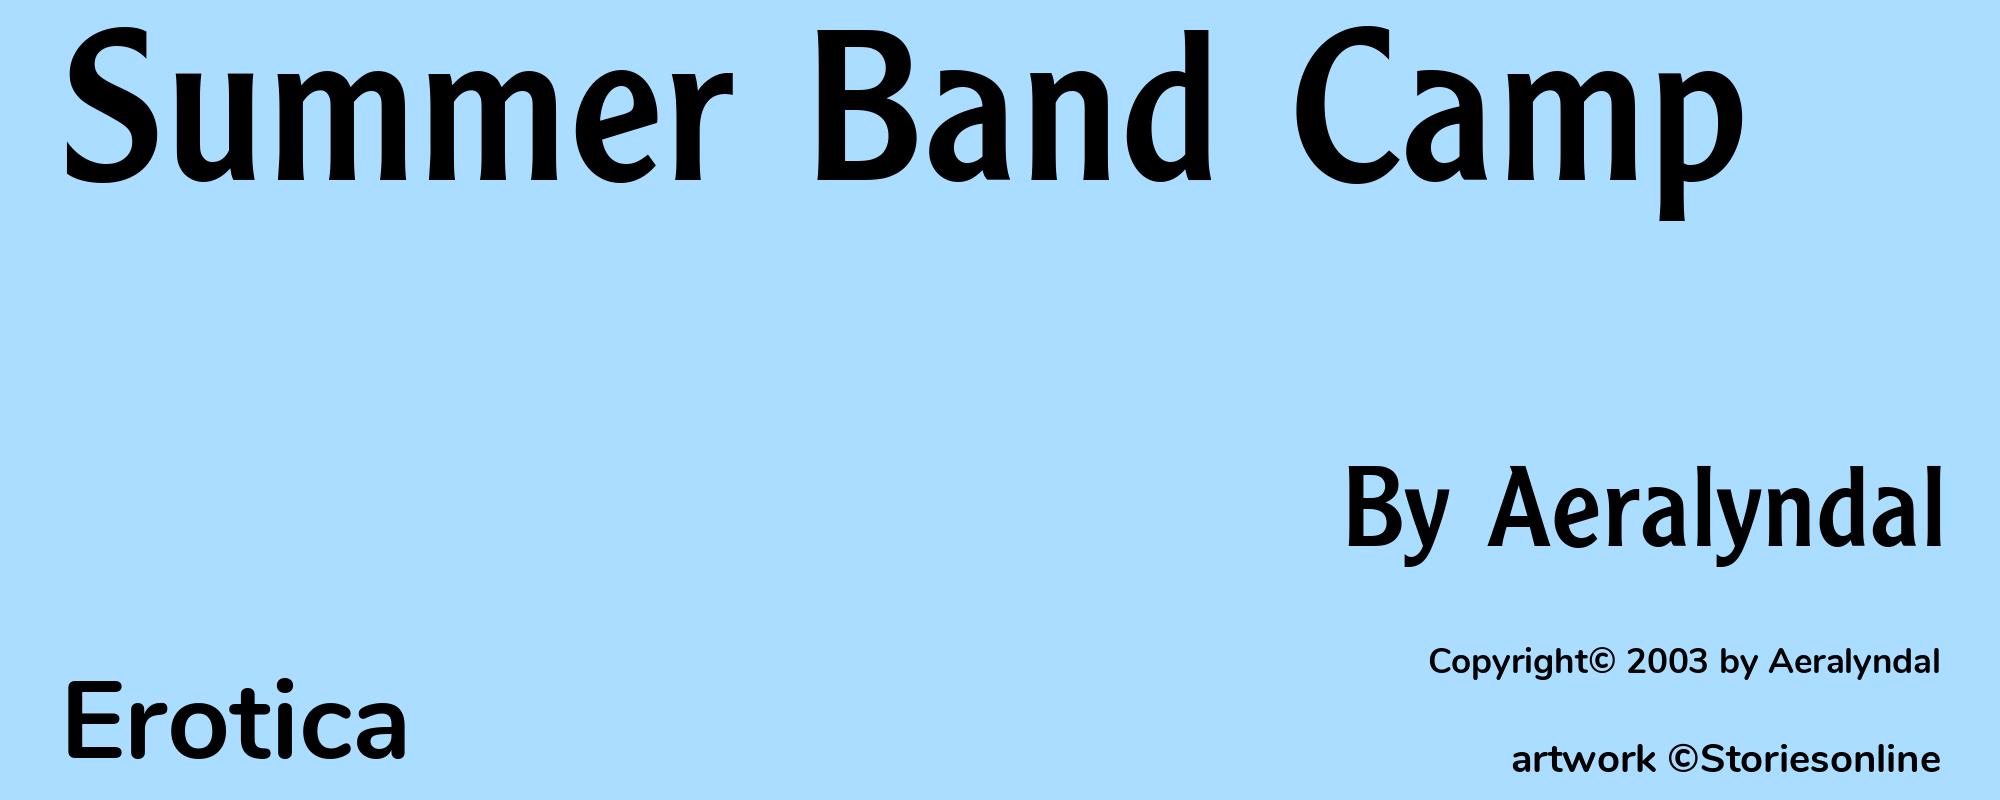 Summer Band Camp - Cover